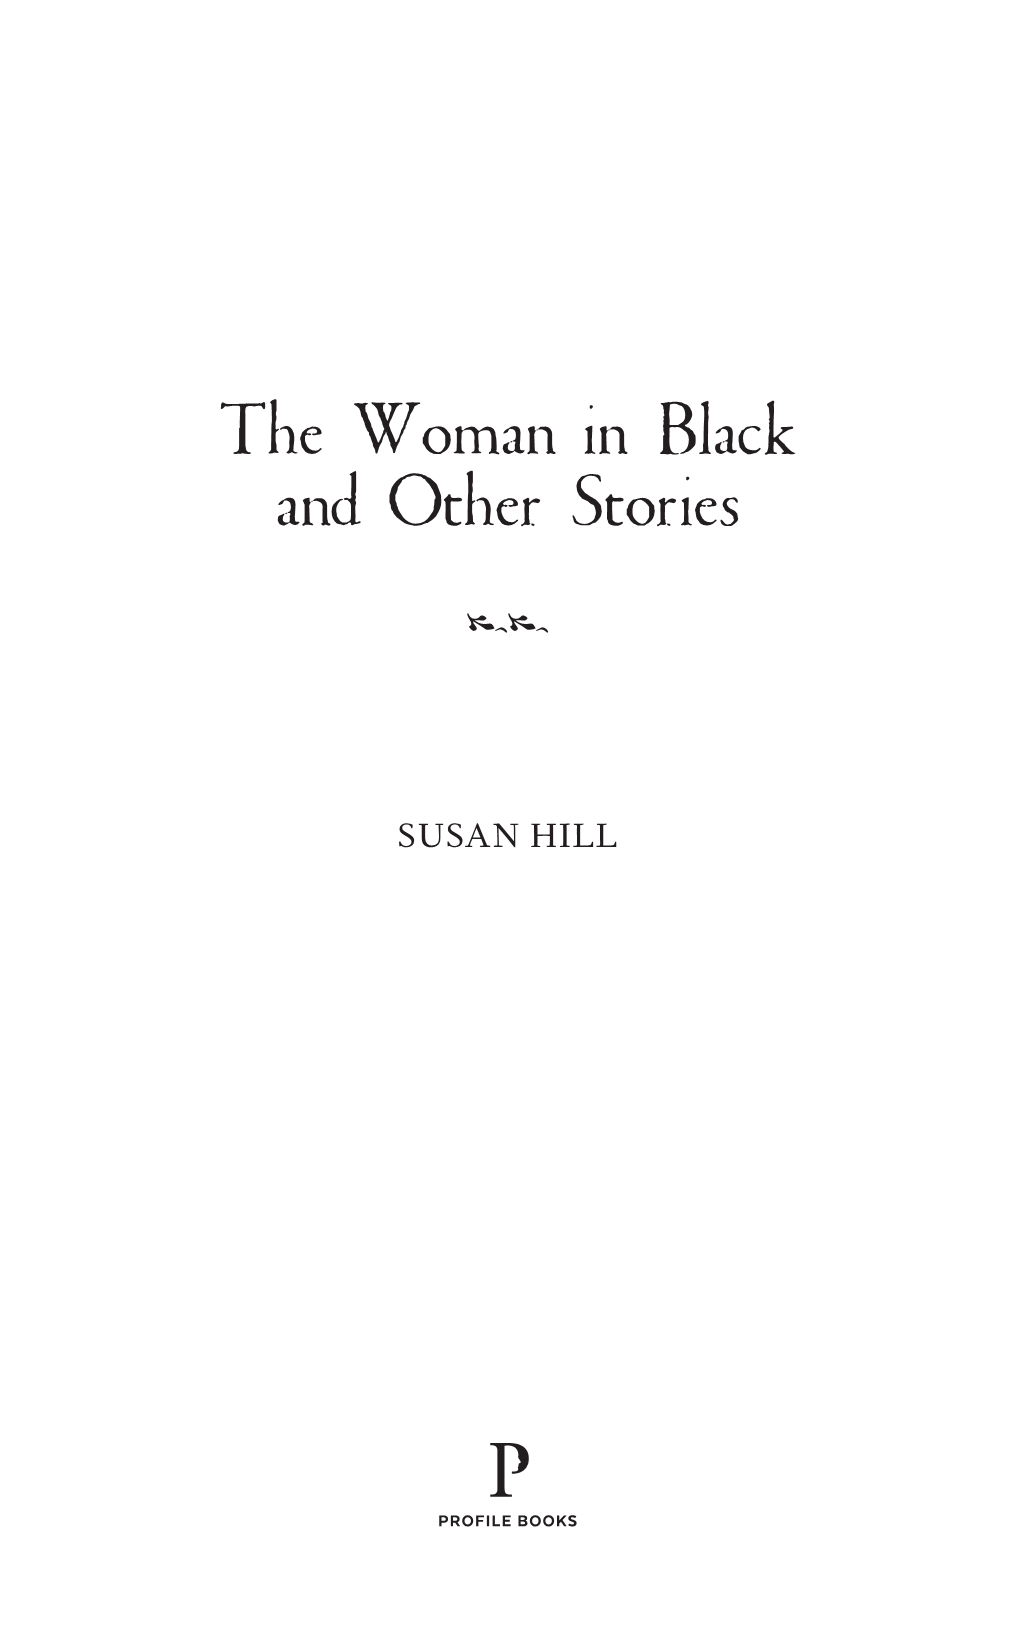 The Woman in Black and Other Stories